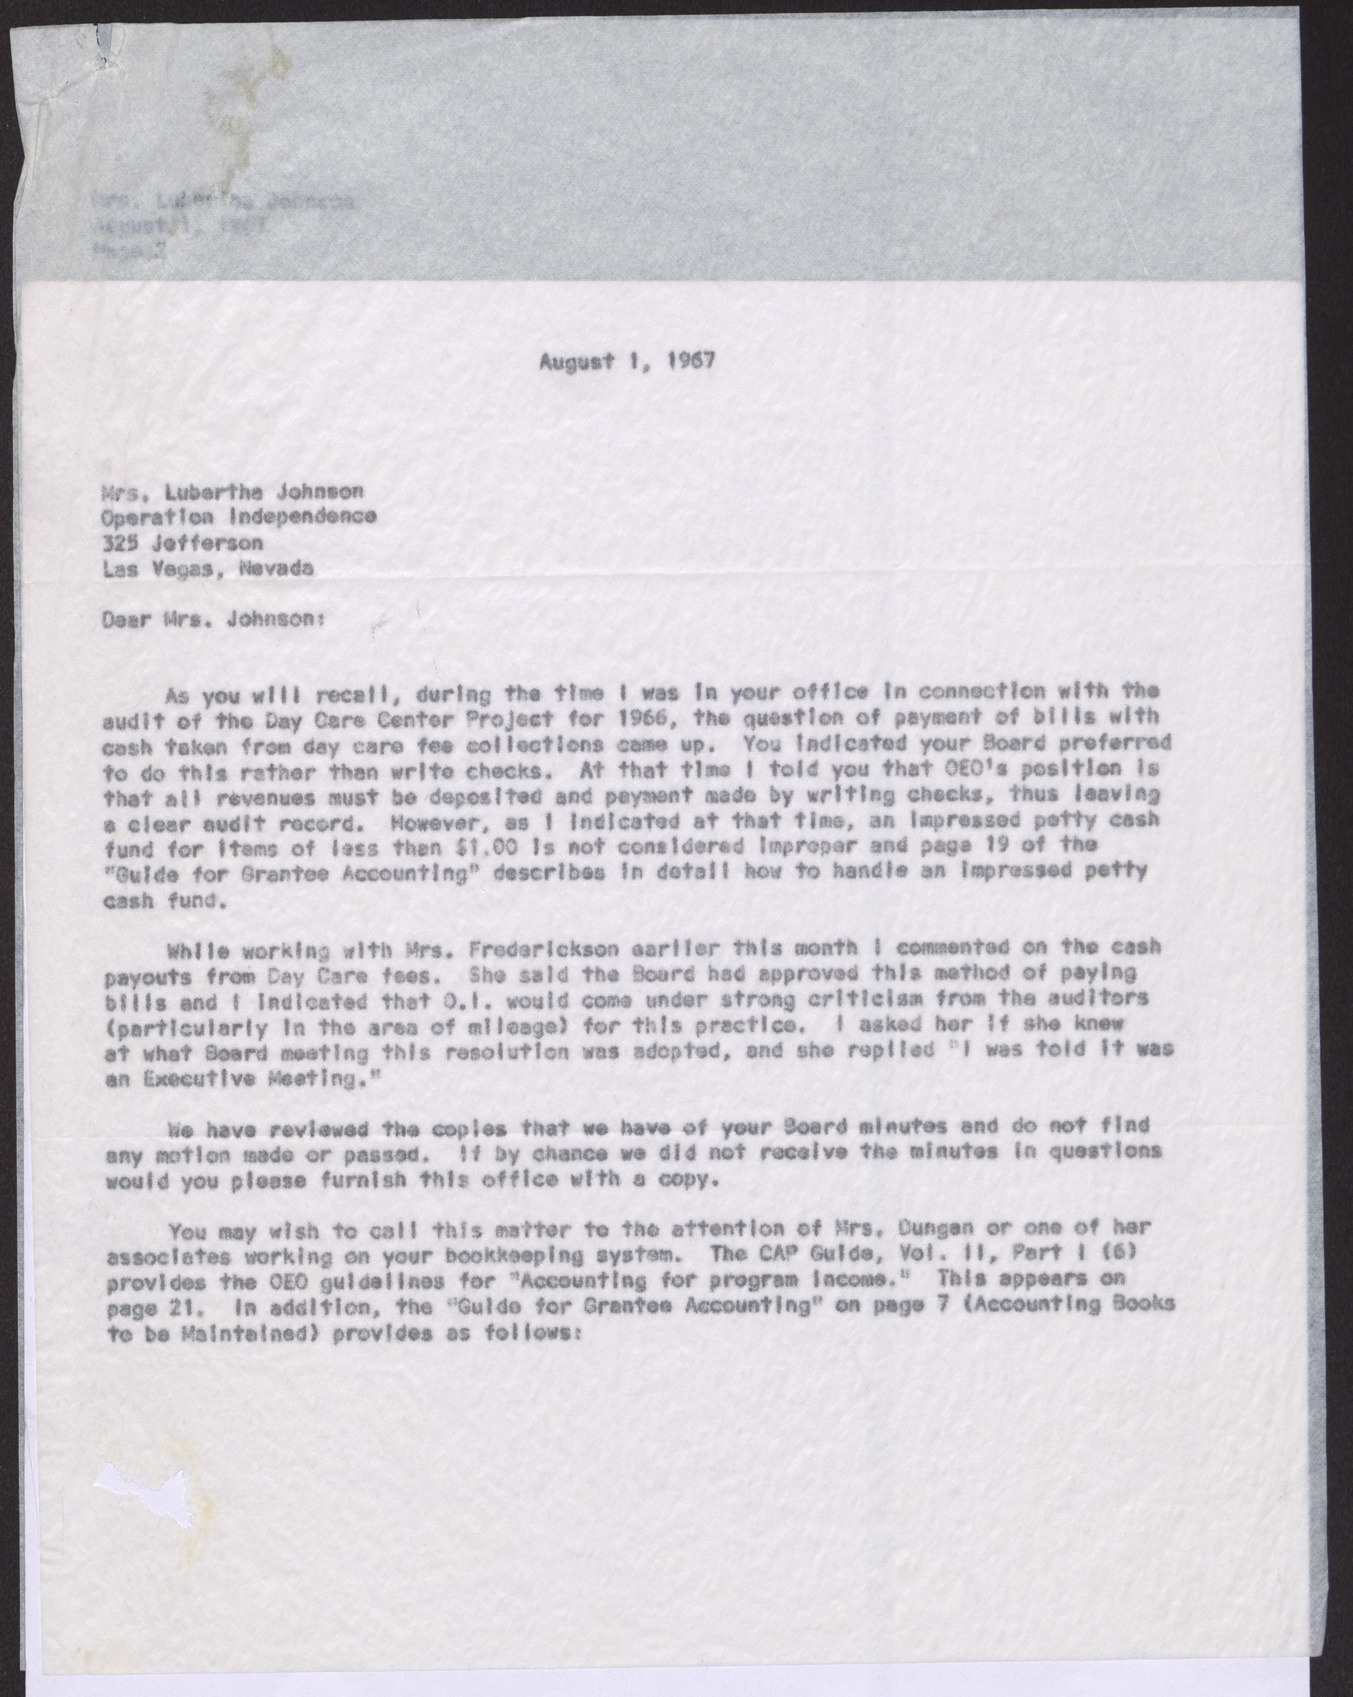 Letter to Mrs. Lubertha M. Johnson from Evelyn H. Maudlin (2 pages), August 1, 1967